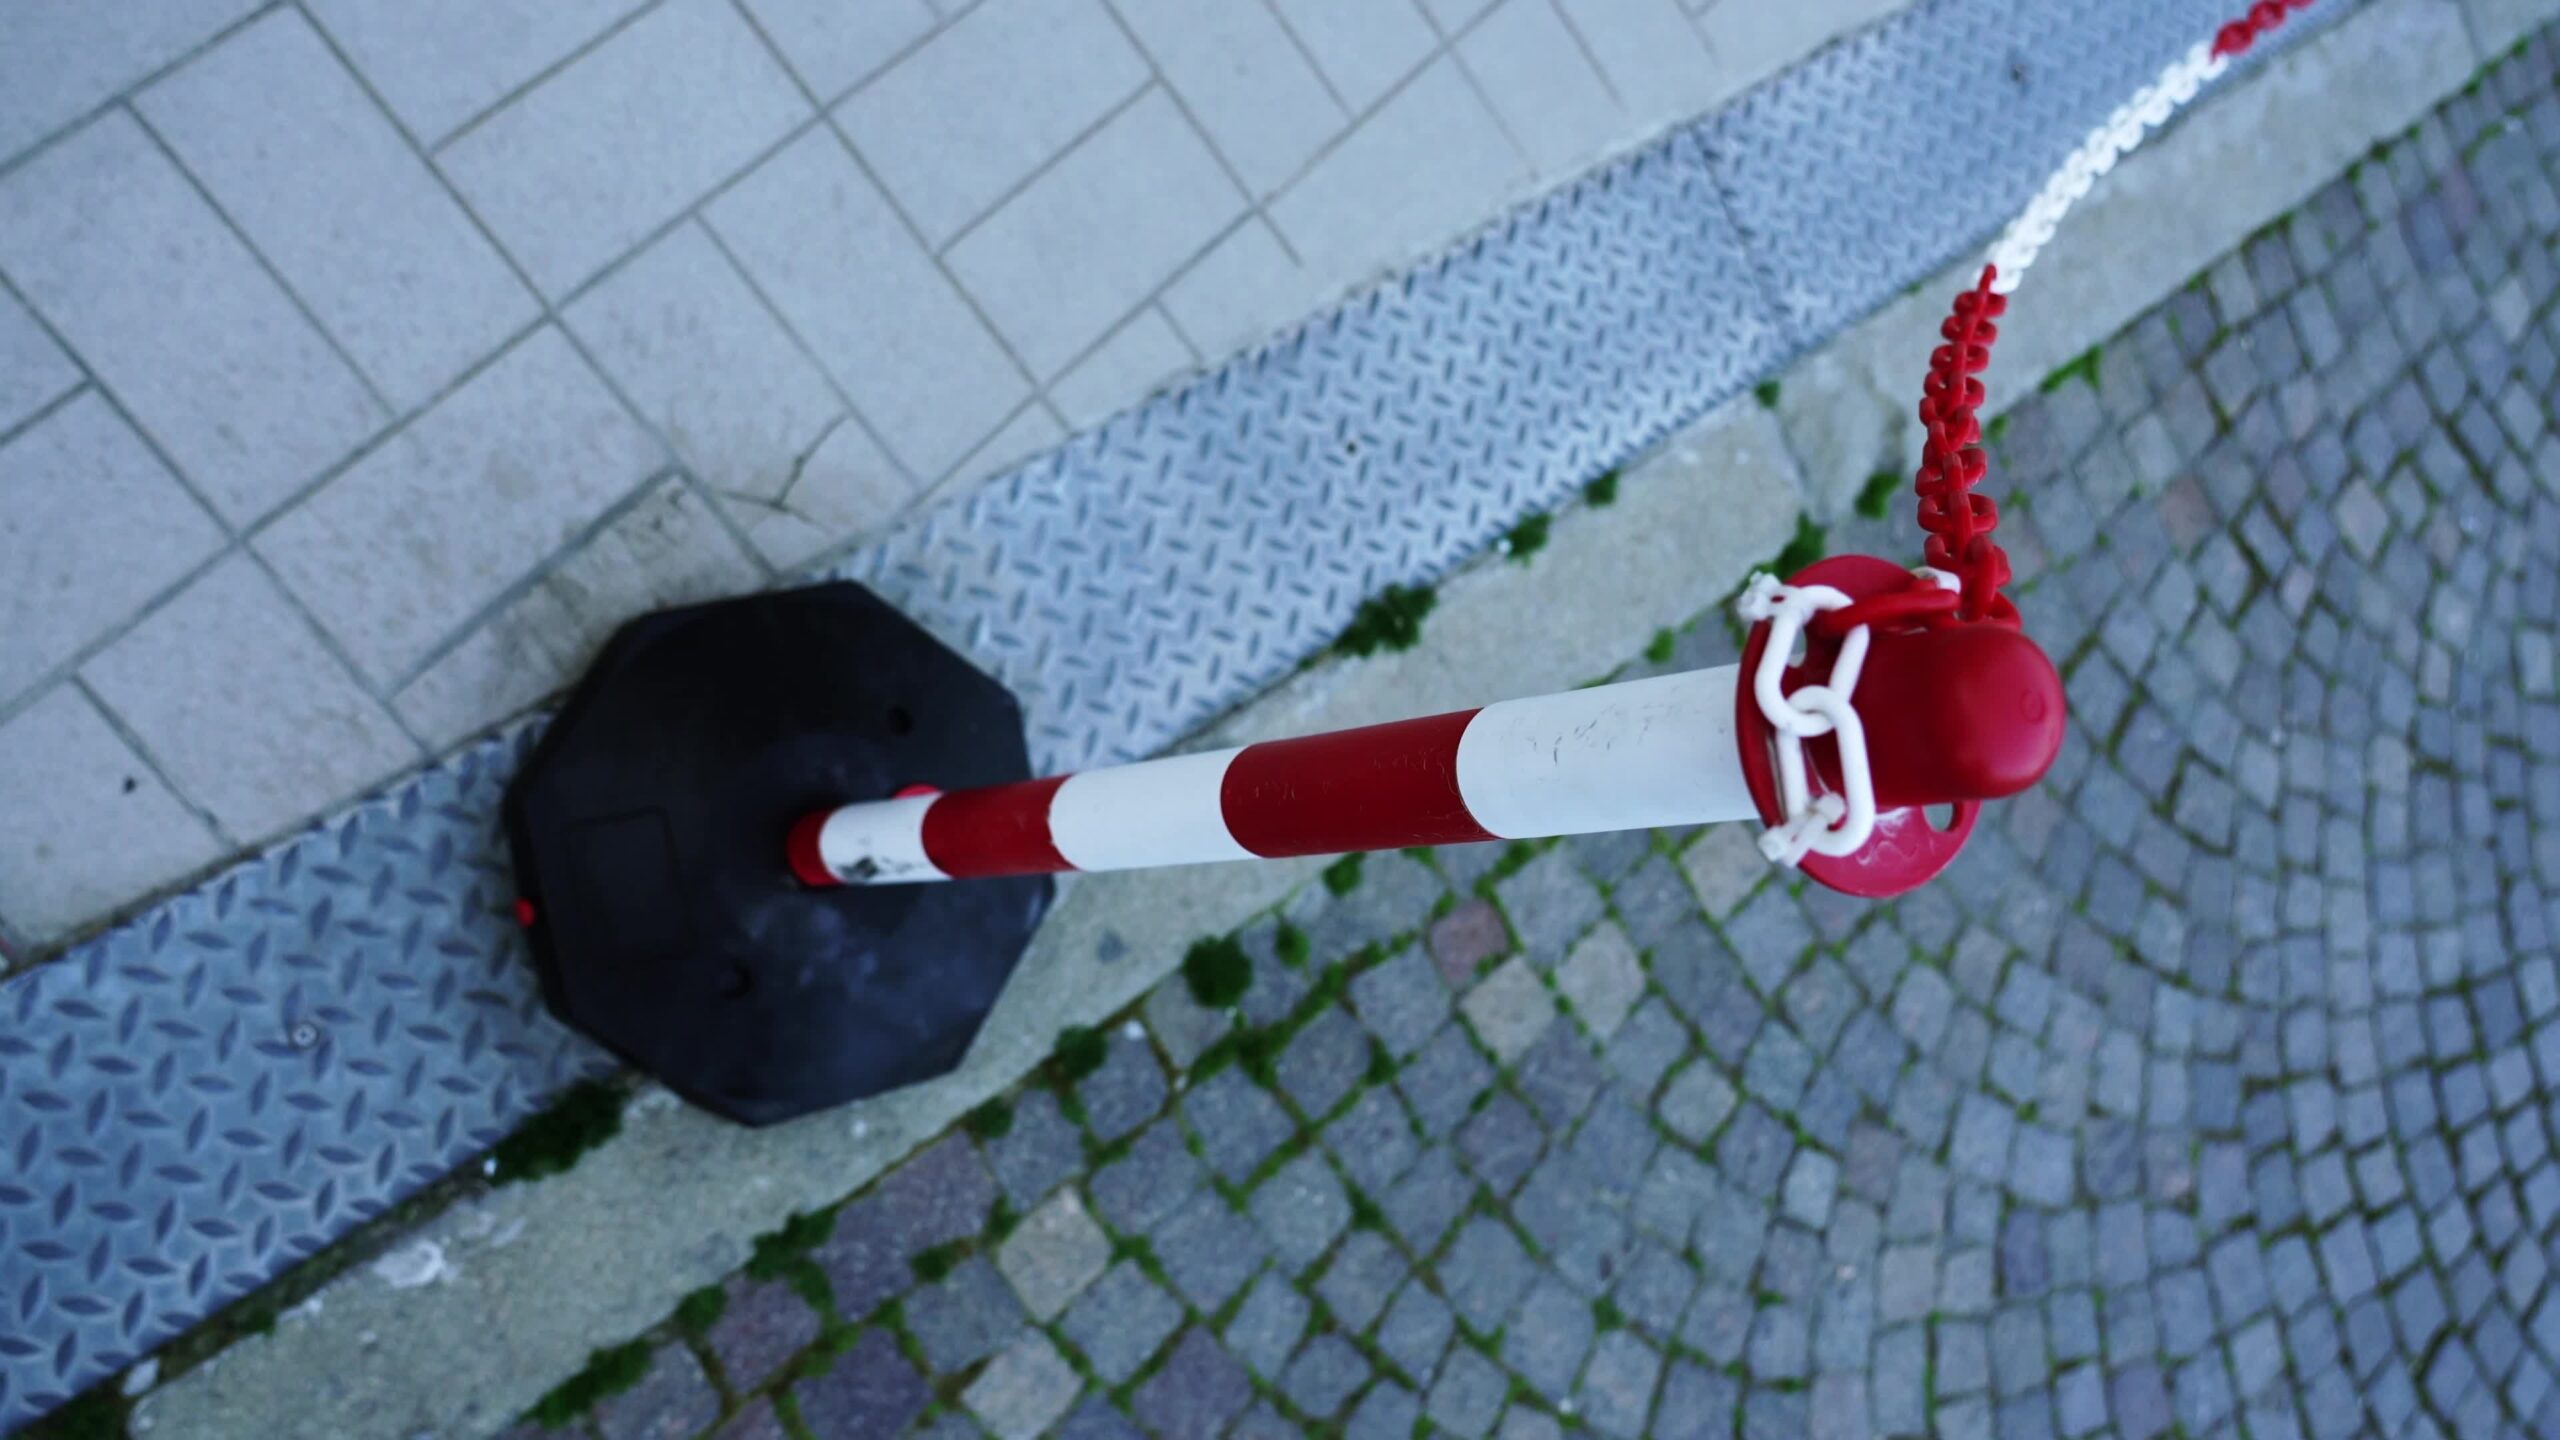 Red and white pole with coloured chain located on drain